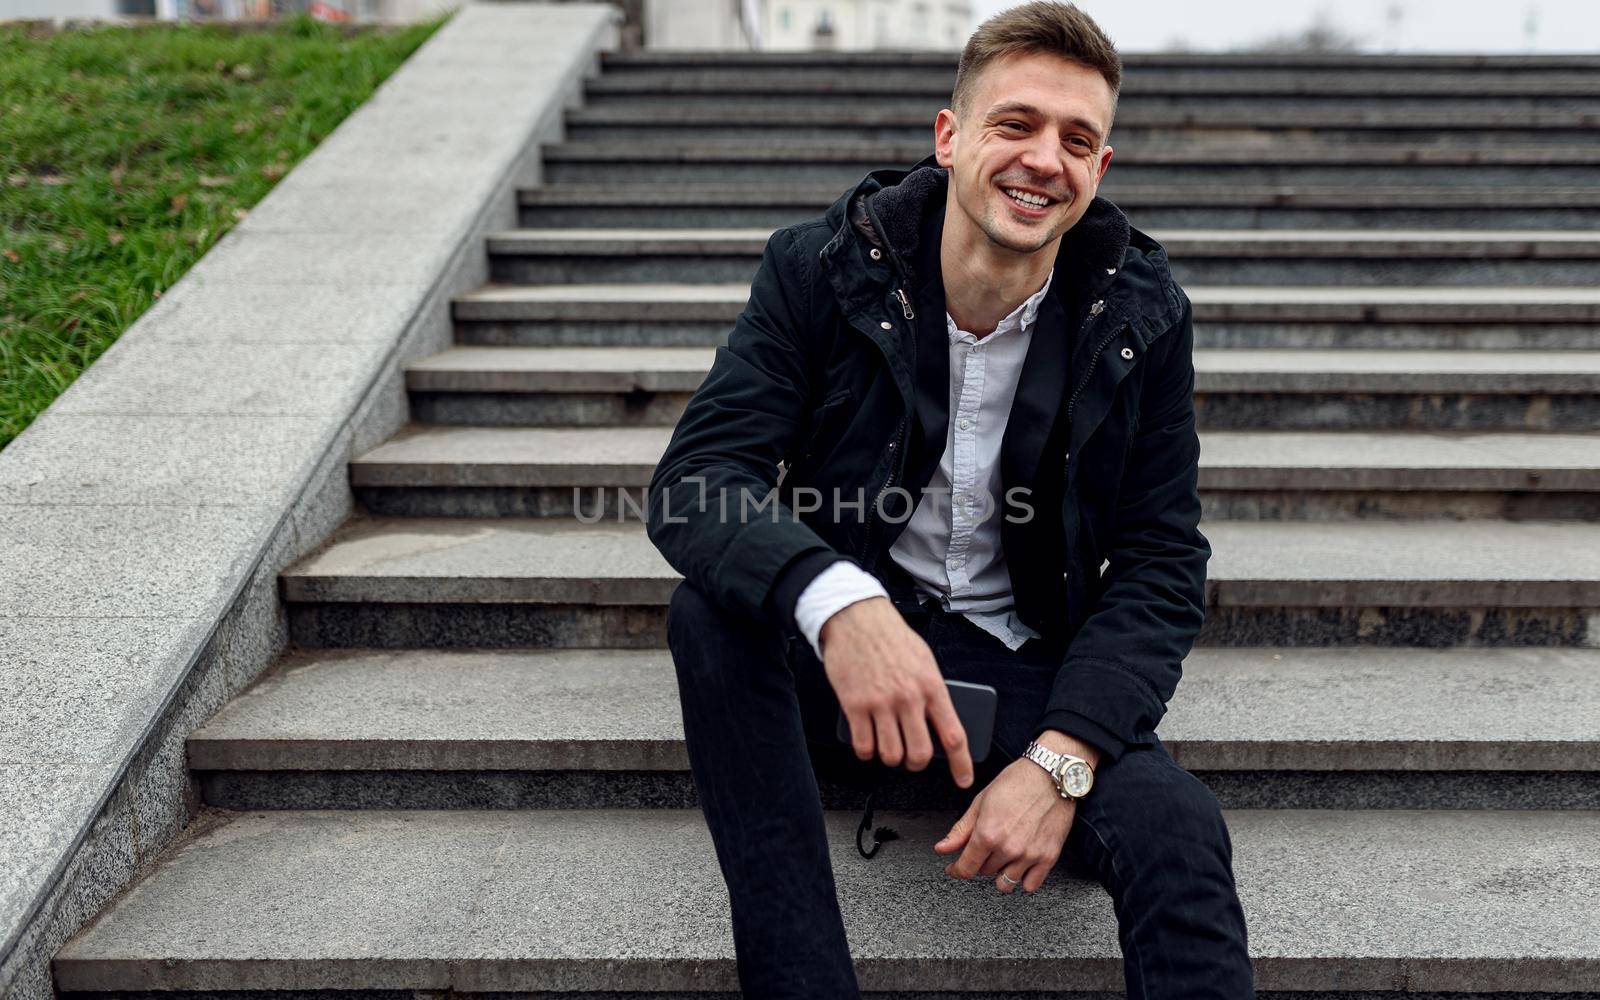 Waist up of happy handsome guy holding smartphone while sitting on stairs outdoors. Copy space. Lifestyle concept